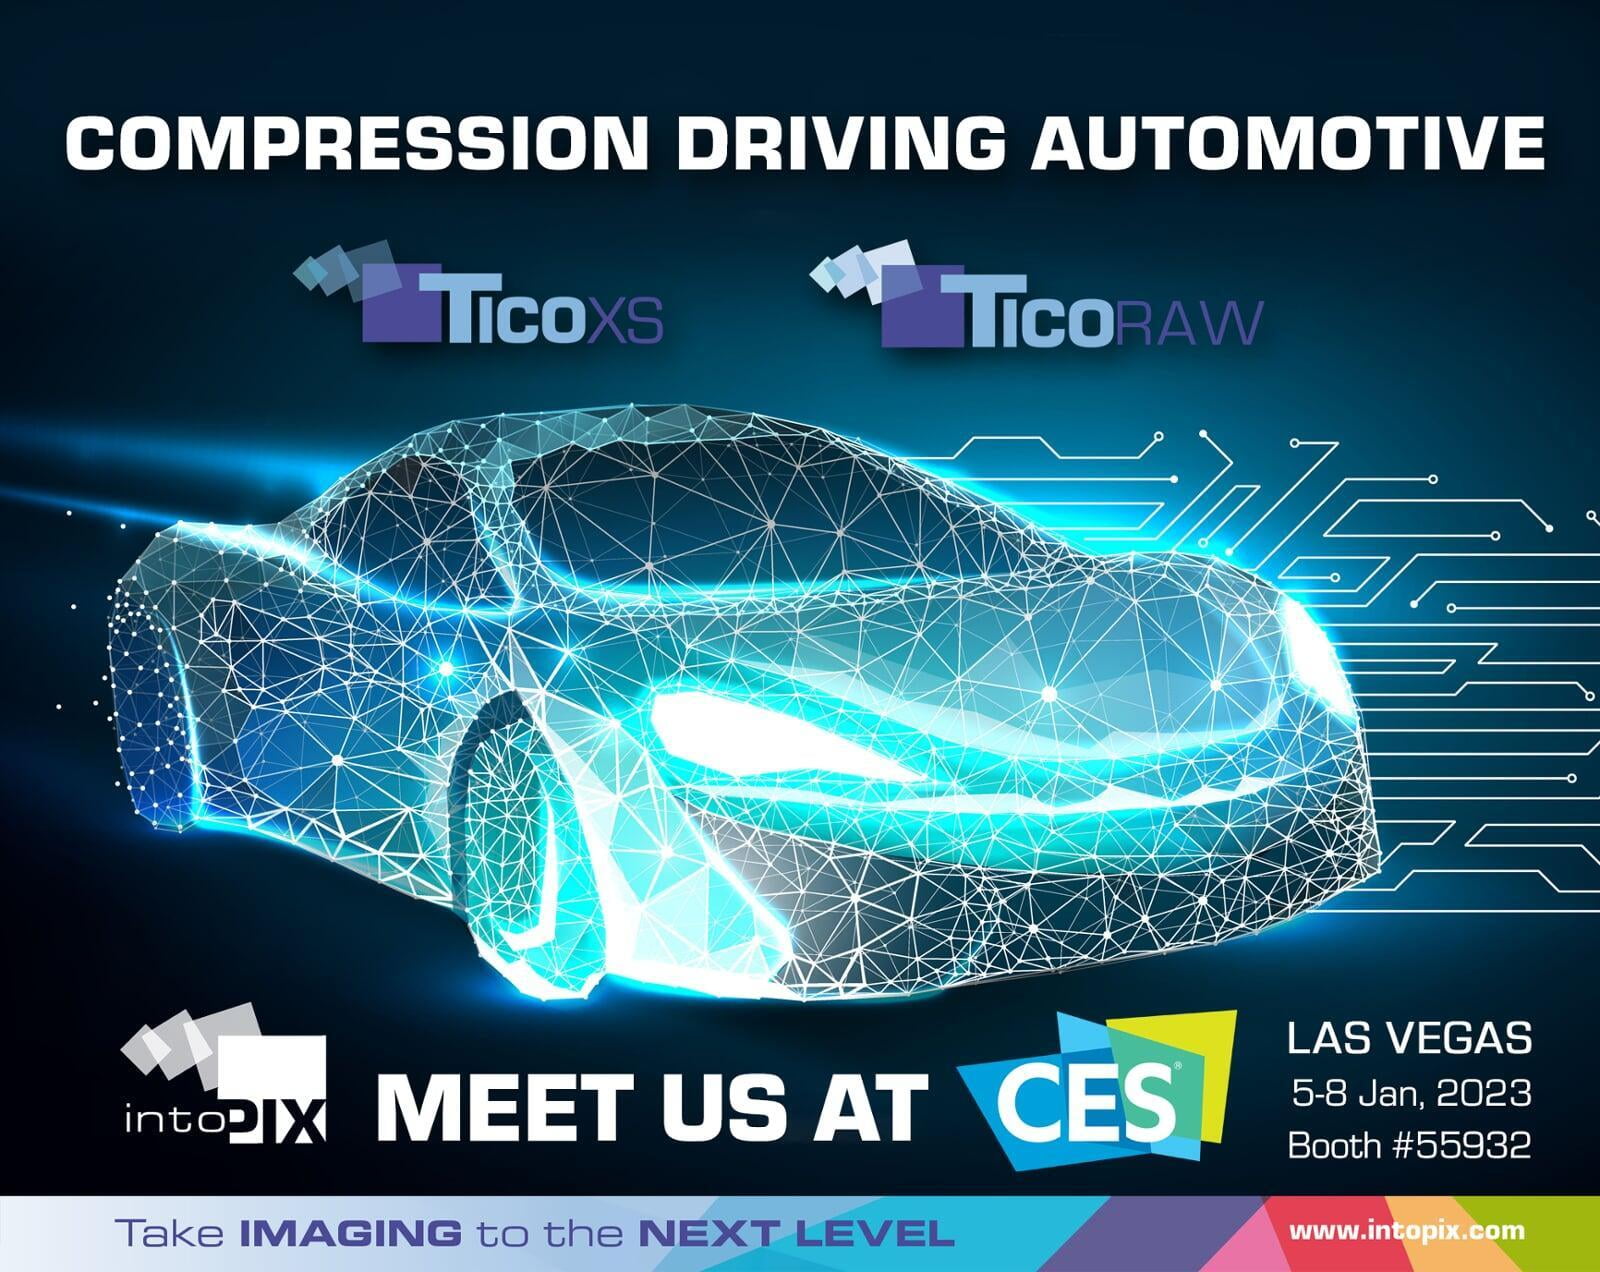 intoPIX shows the new lightweight video compression standards and technologies driving automotive at CES 2023